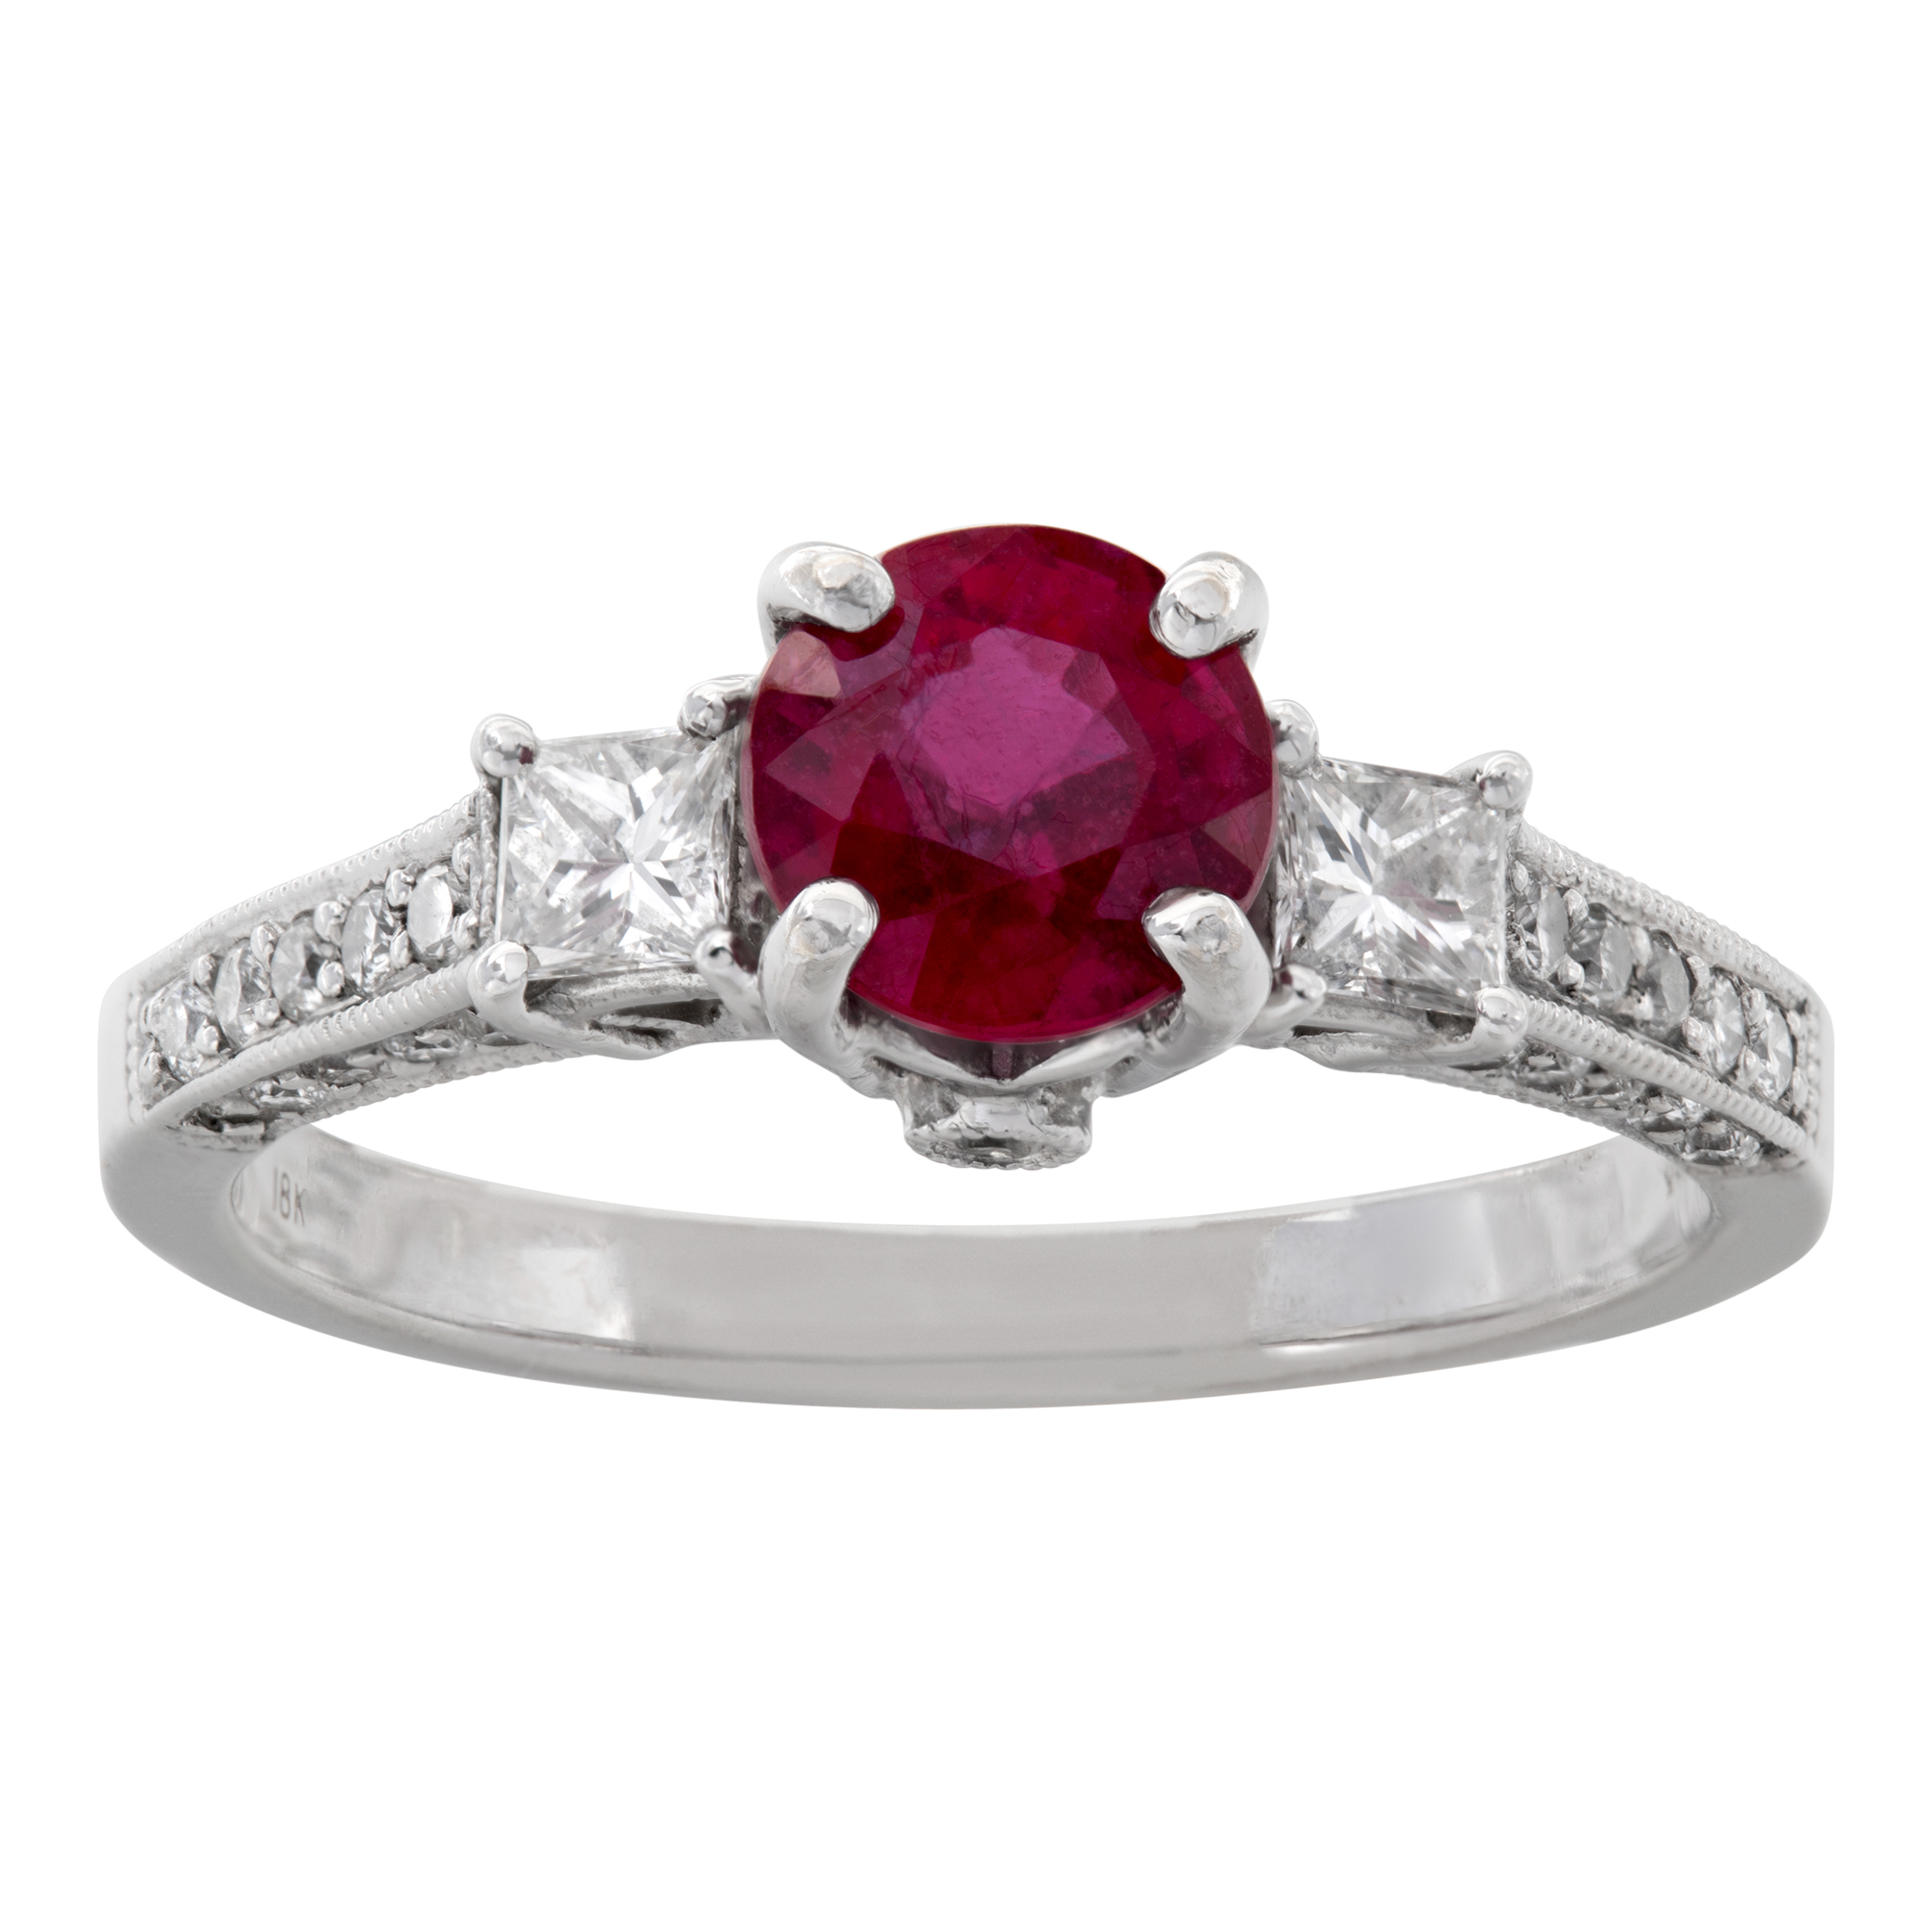 18k white gold ring with approx 0.80 ct princess cut center ruby with approx 0.30 cts of diamond accents. Size 7. (Stones)